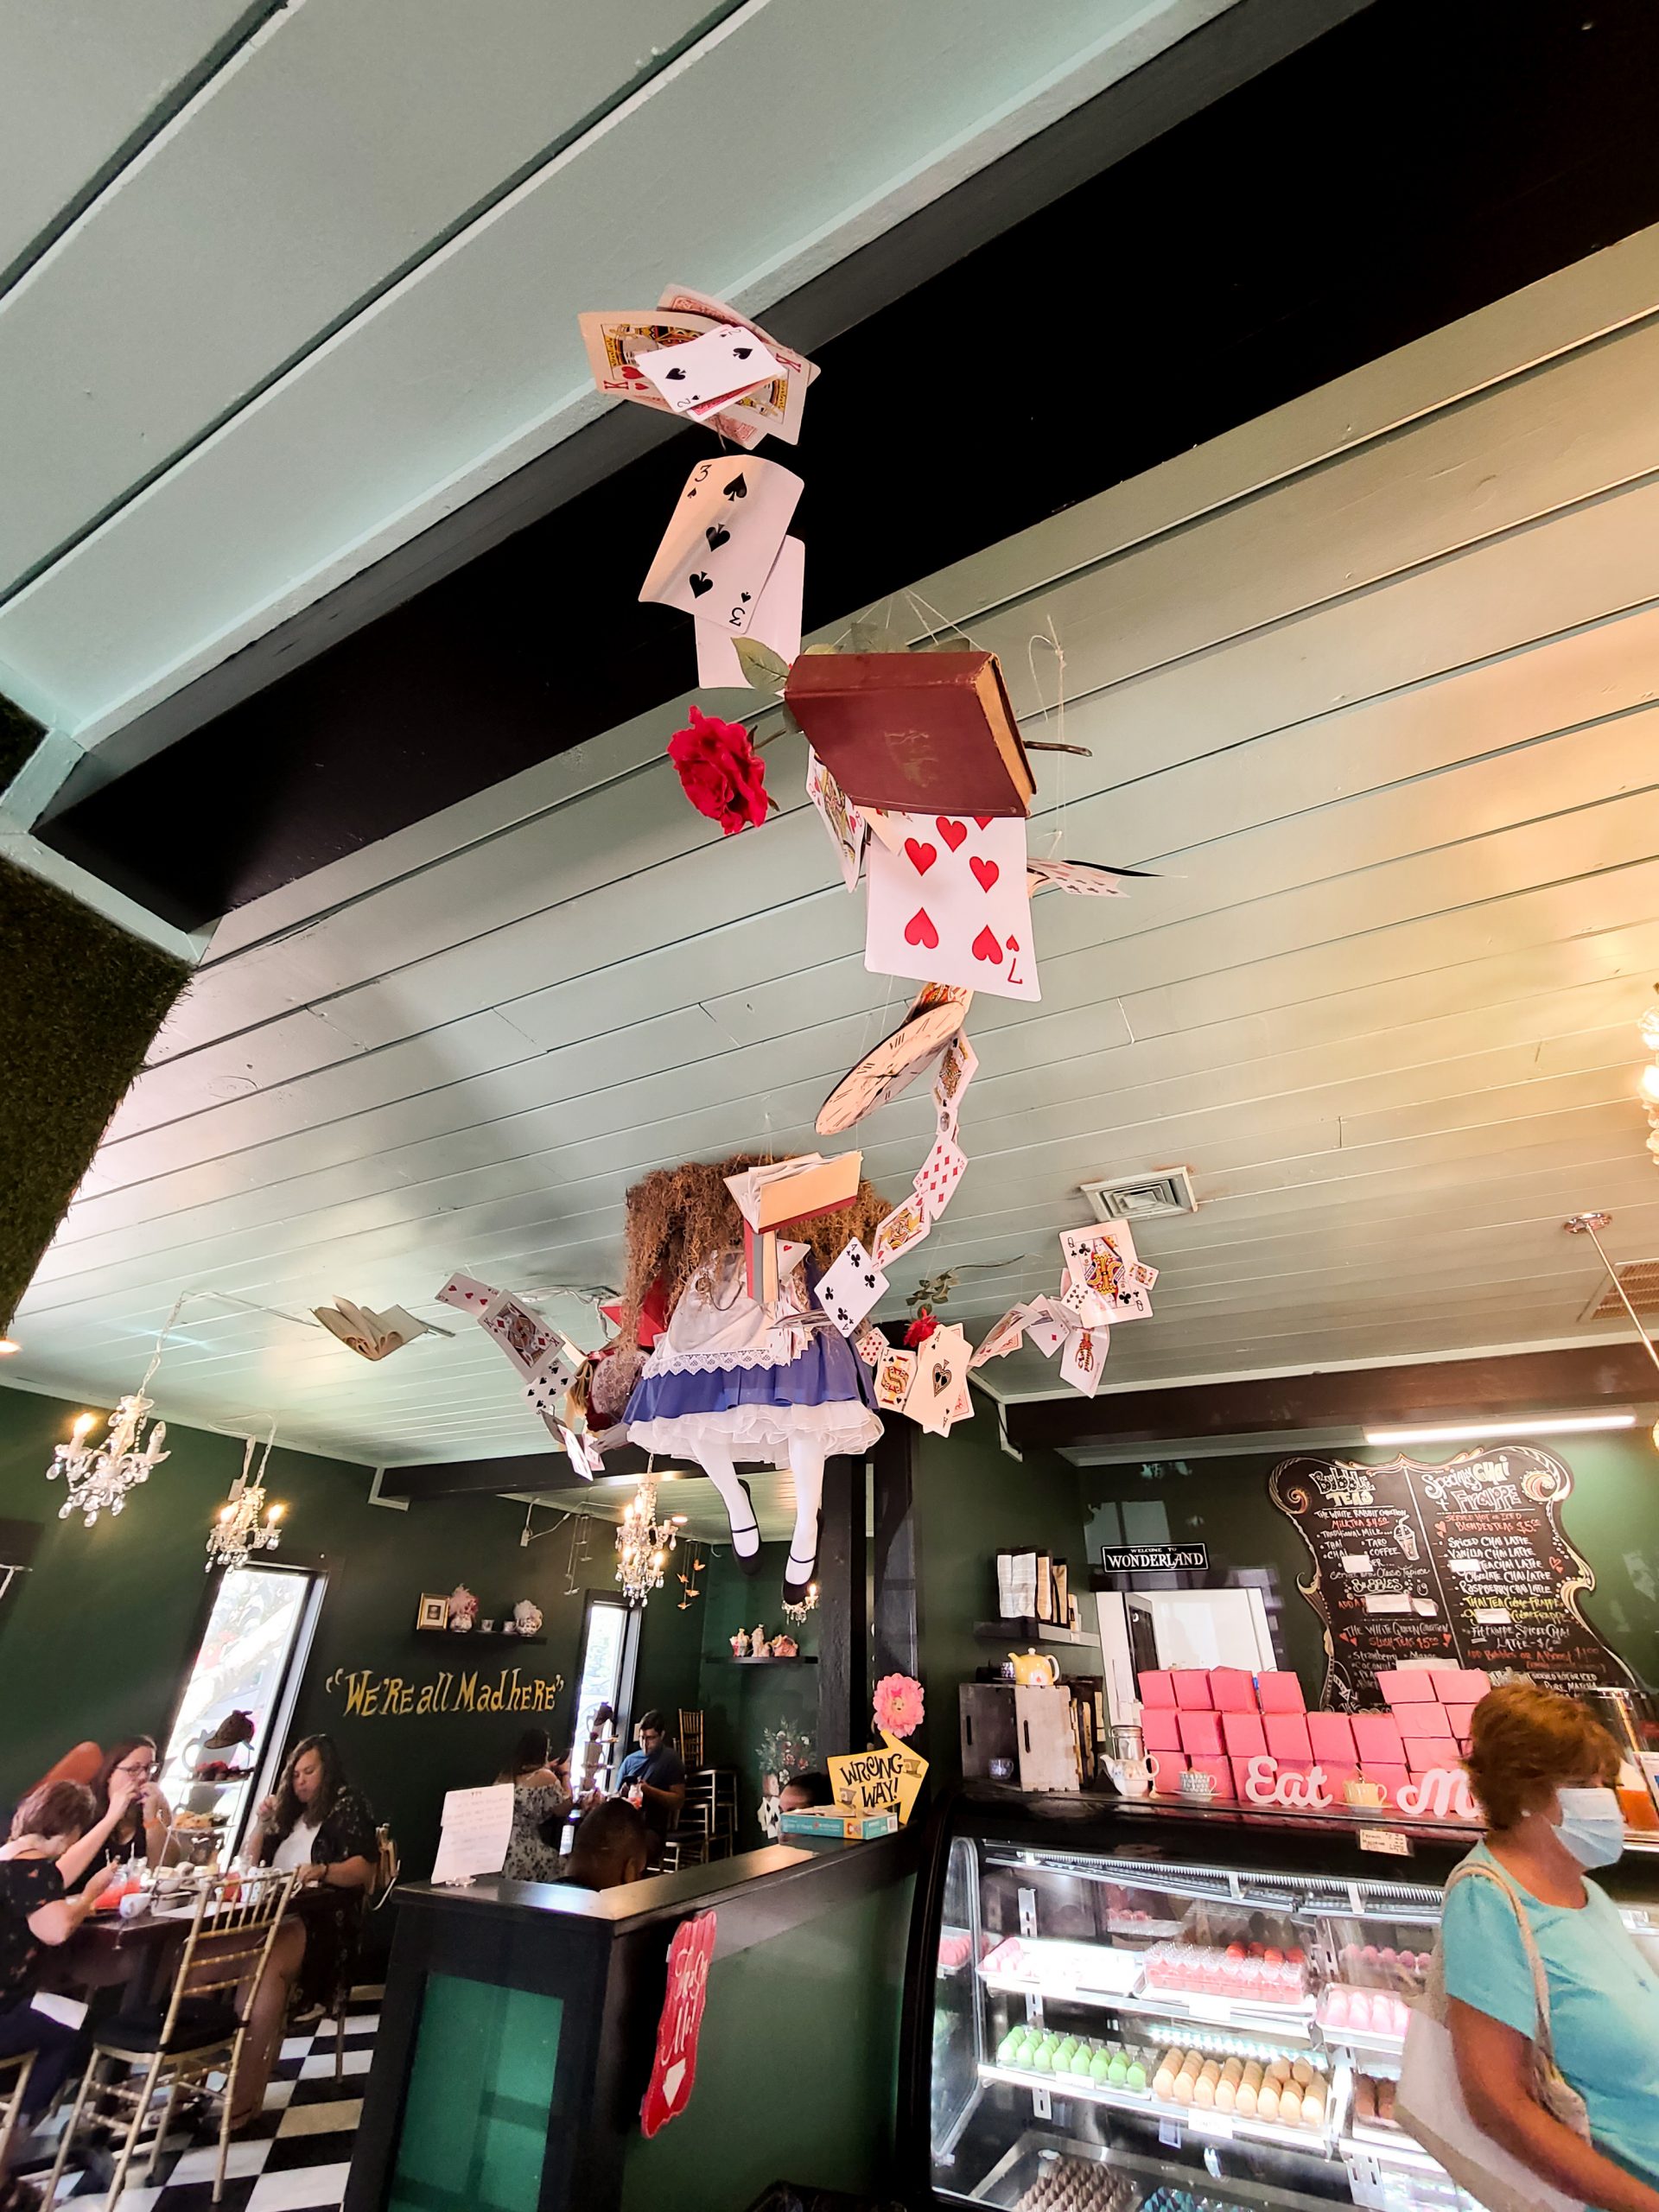 A photo of a decoration inside an Alice in Wonderland themed shop that is made to look as though Alice is falling through the shop's ceiling